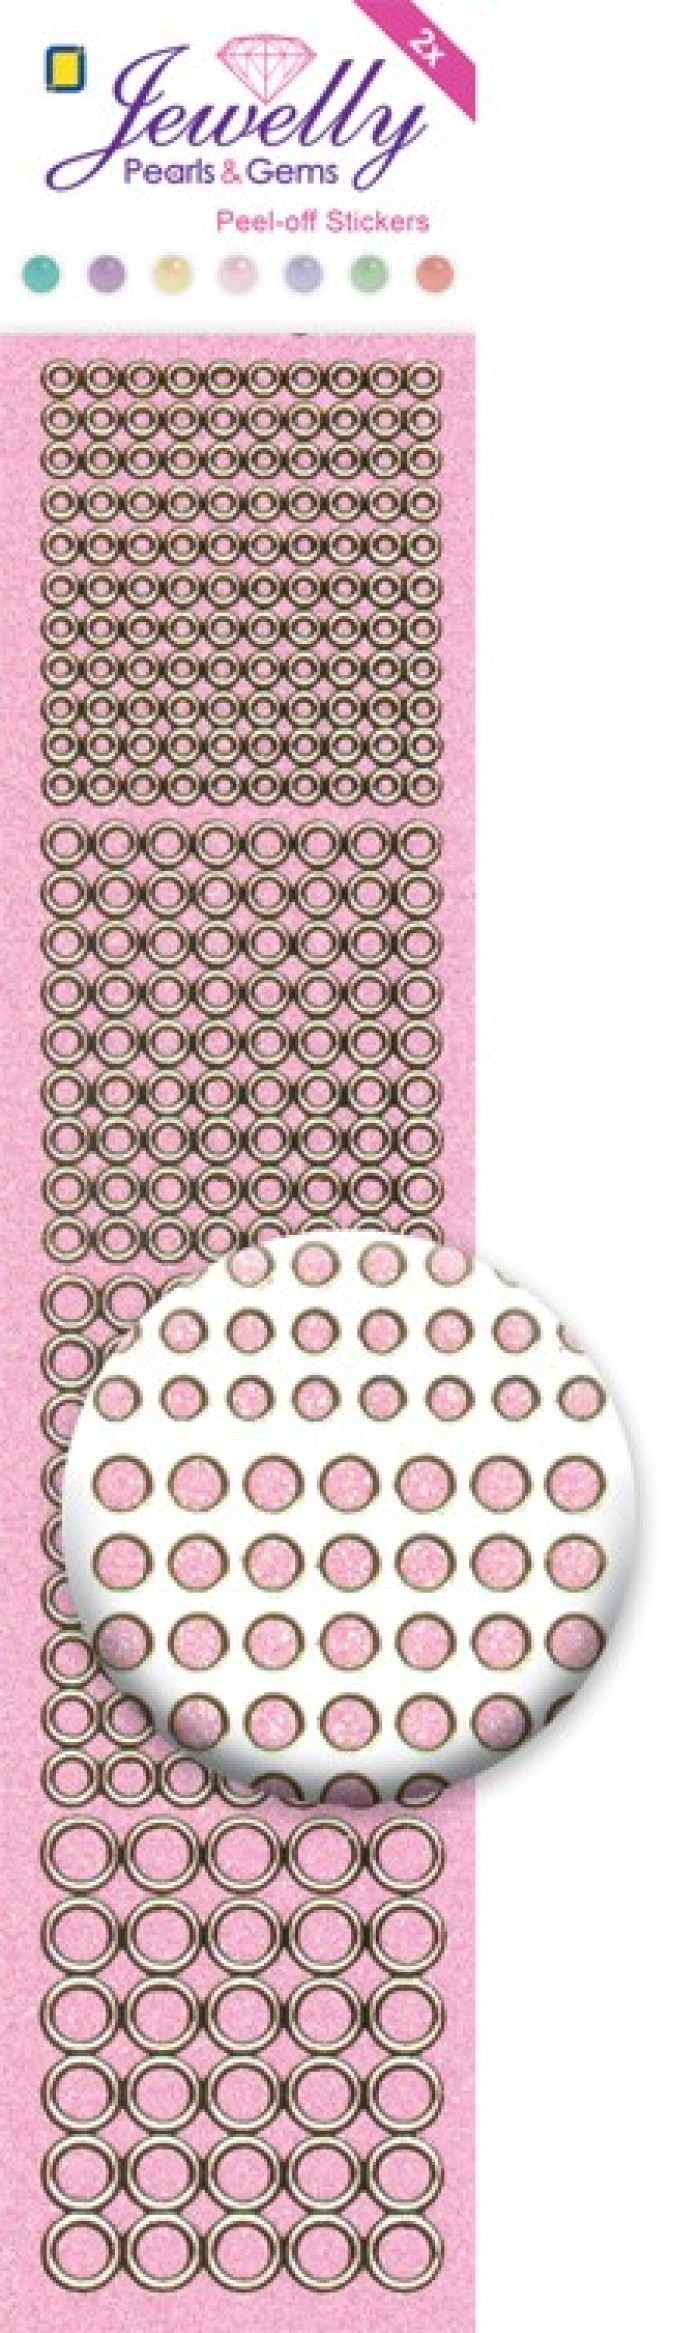 Jewelly Pearls & Gems Dots GT Pink, 2 sheets 